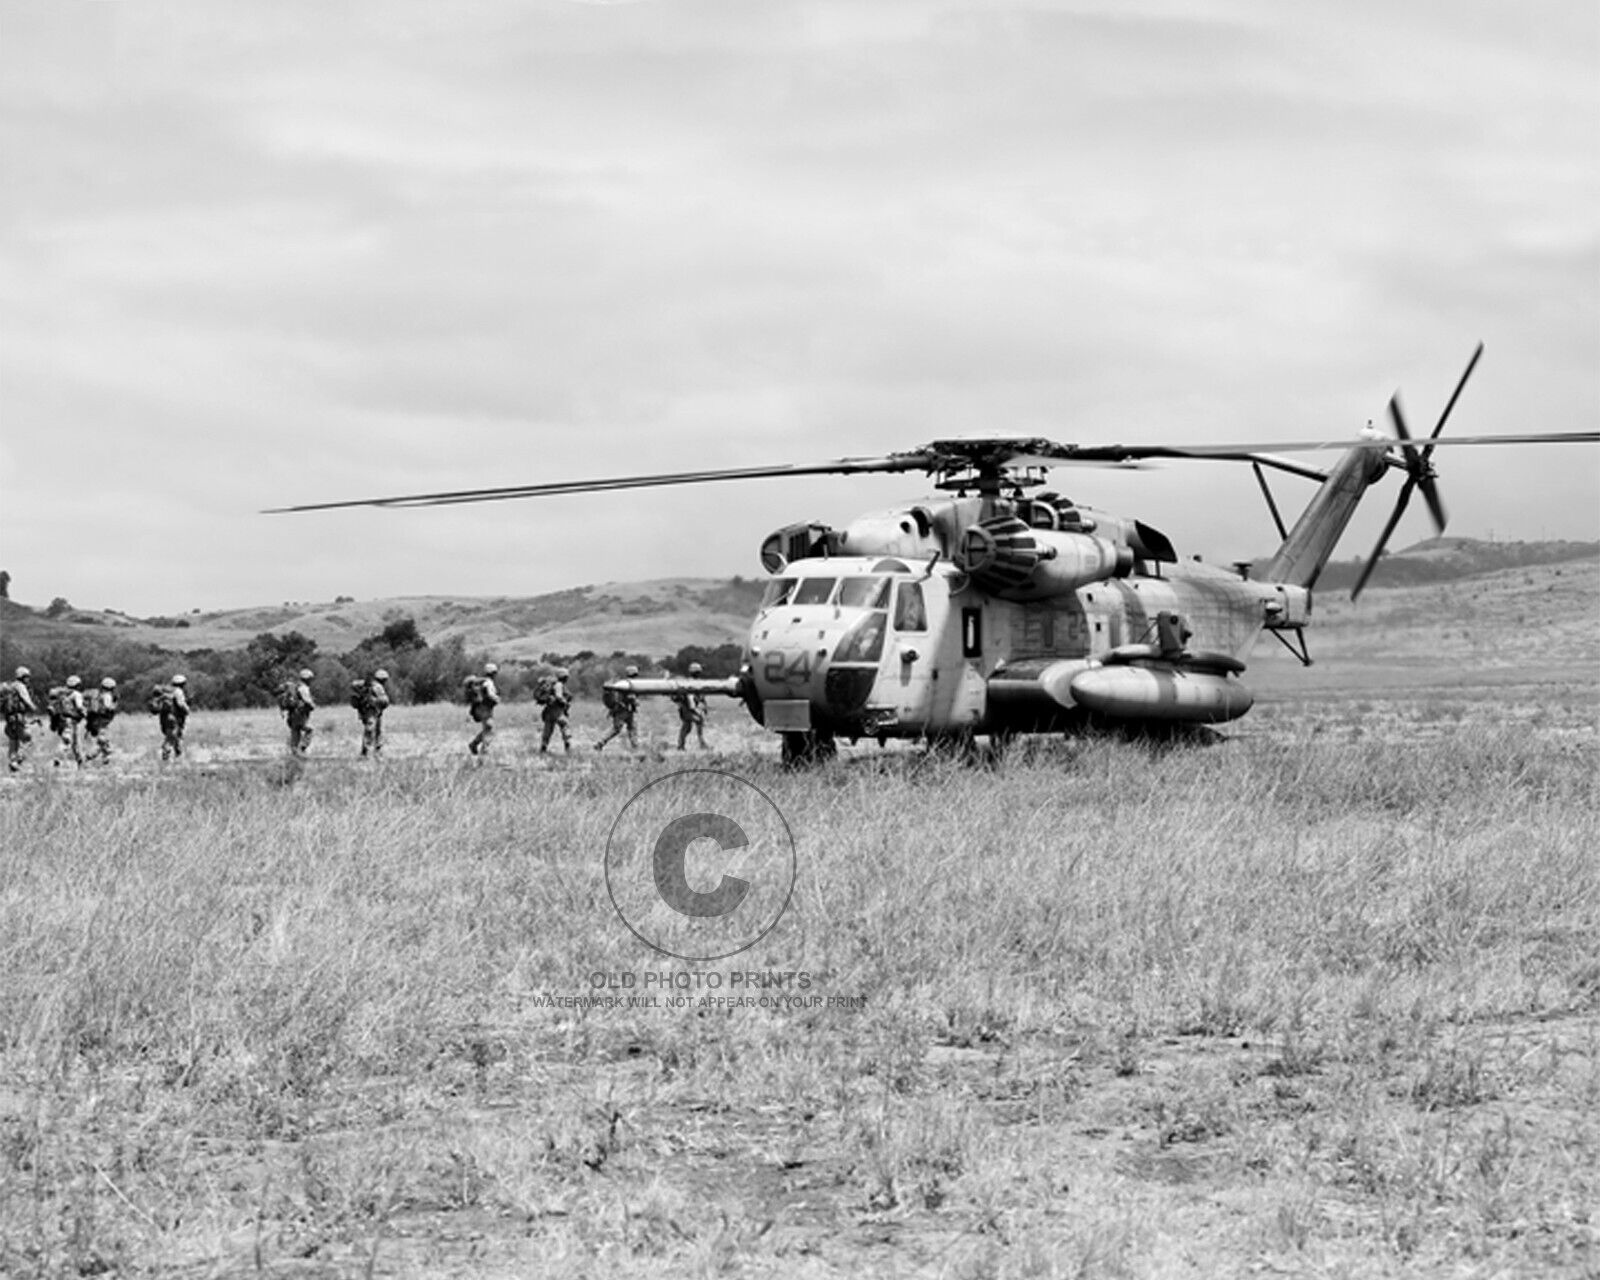 CH-53 Super Stallion Helicopter 2014 Photograph Marines Camp Pendleton 8X10